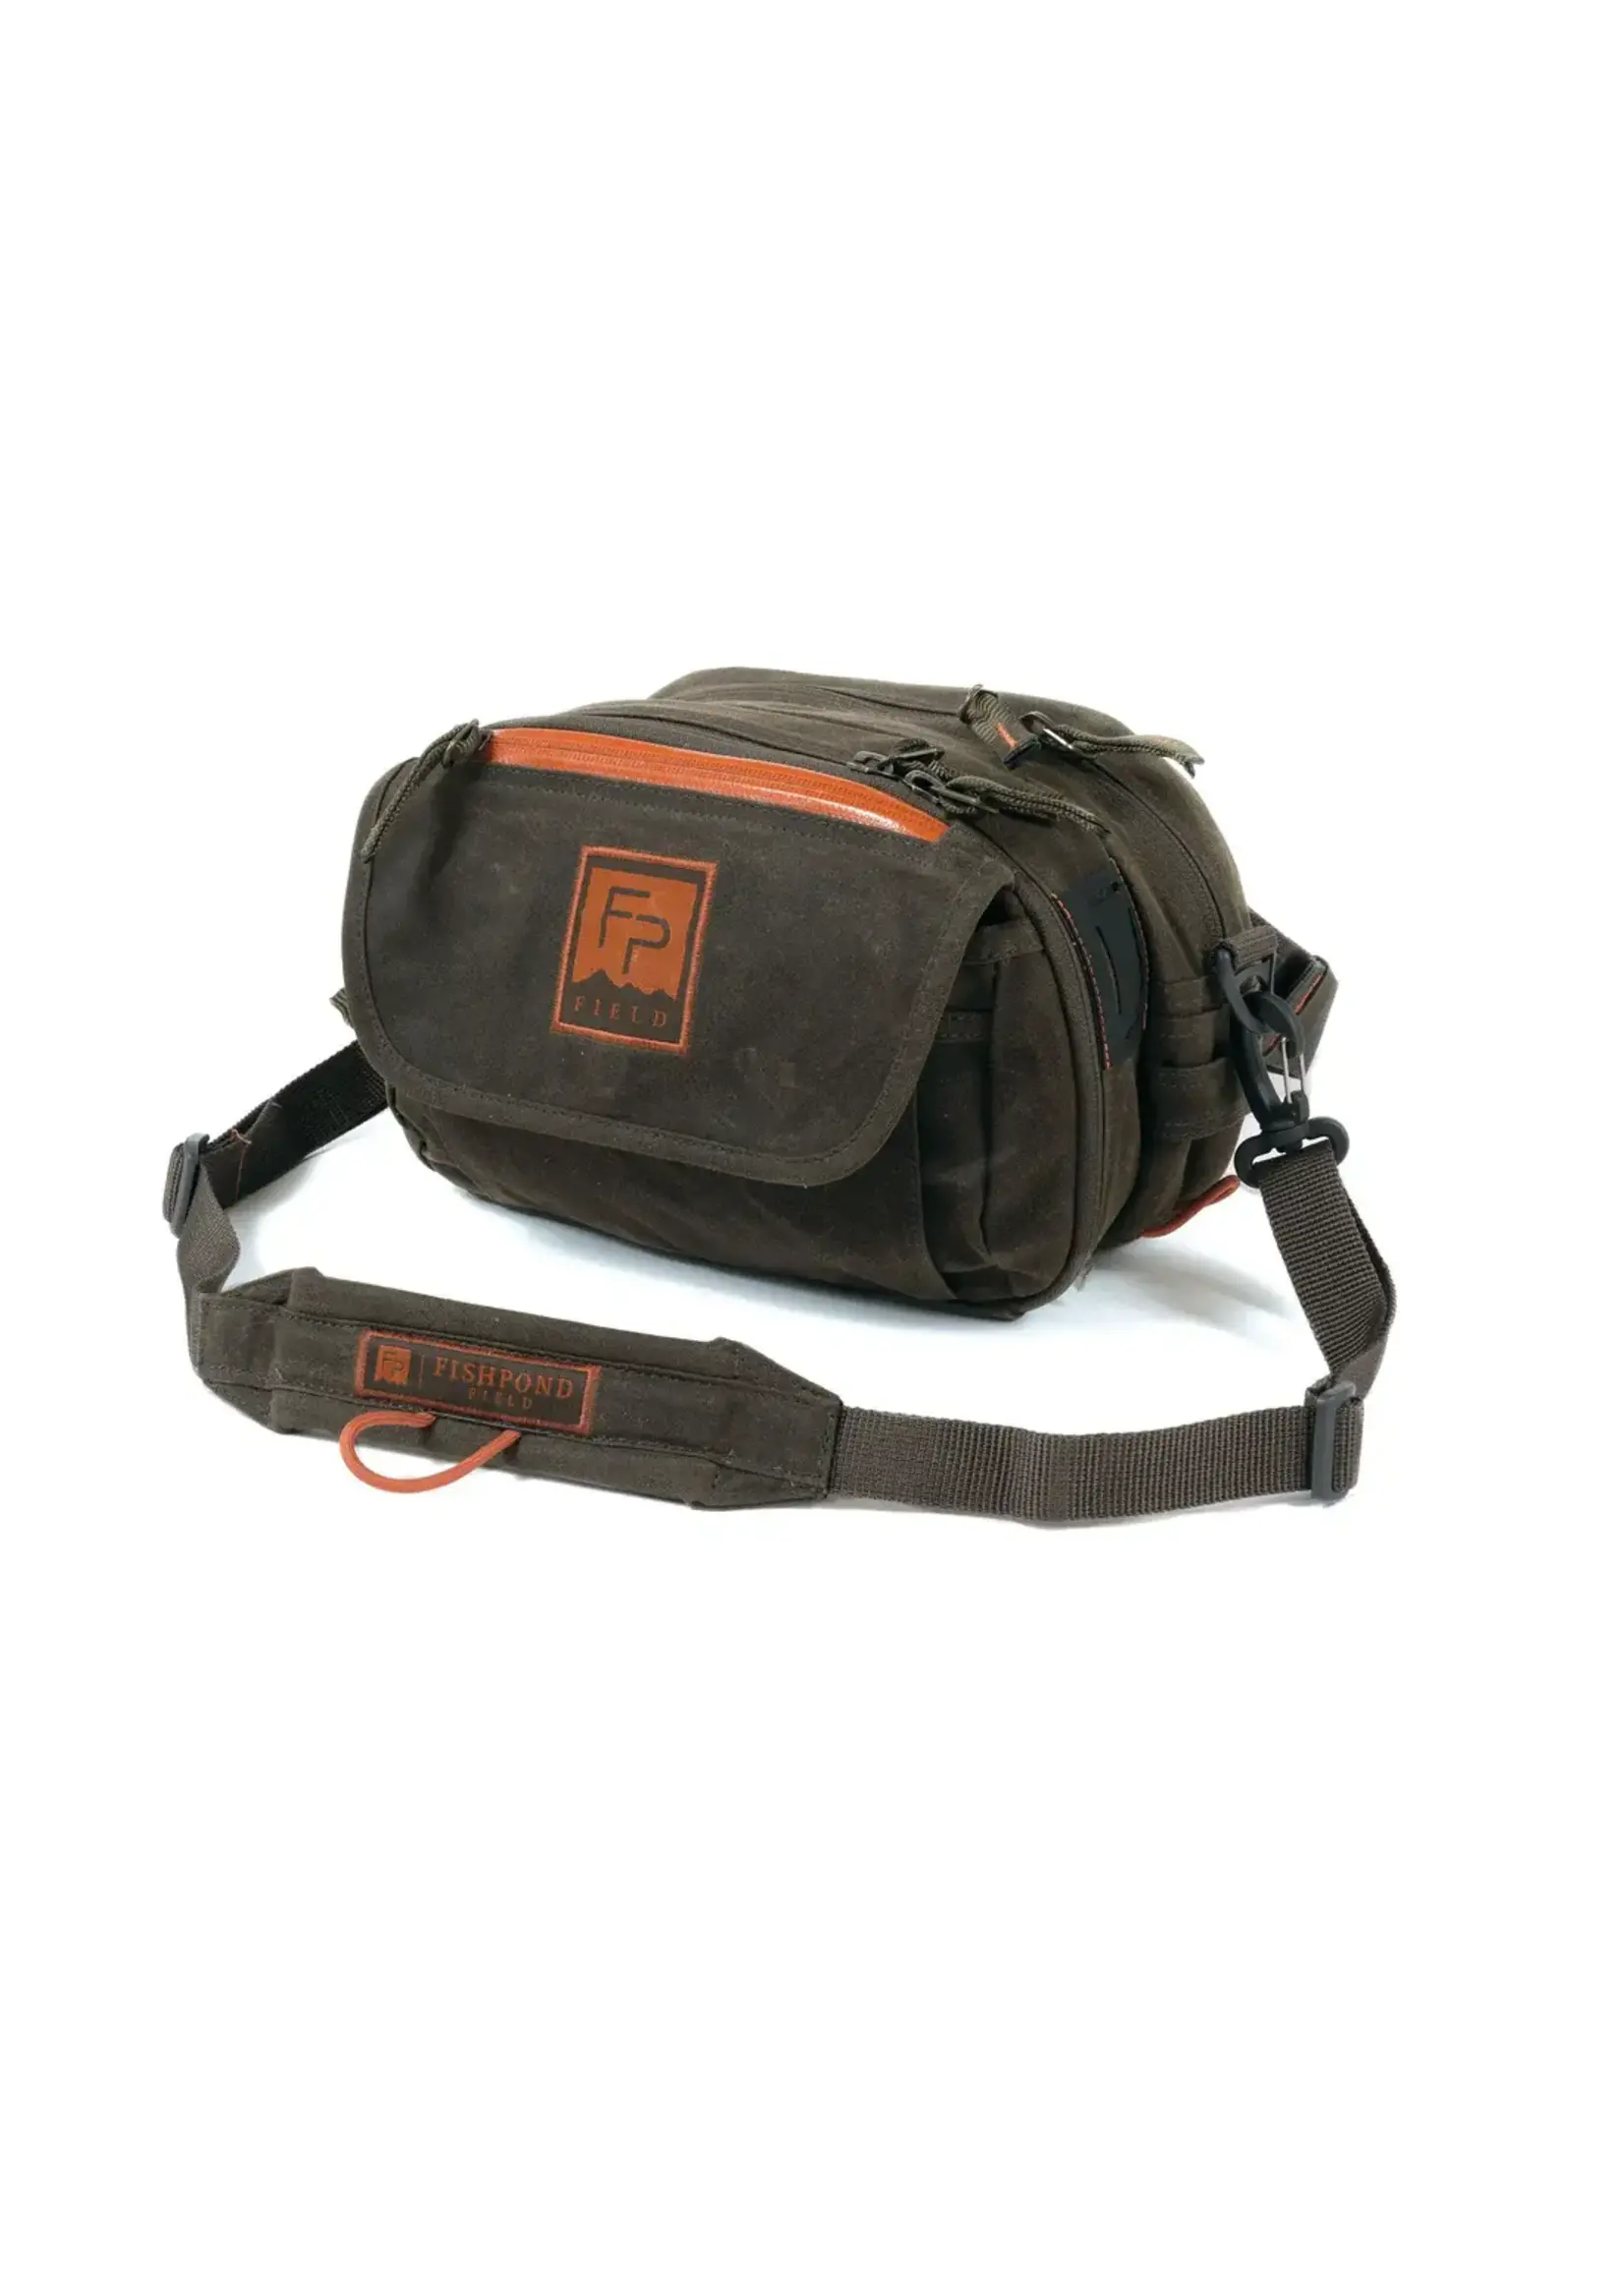 Fishpond Fishpond Blue River Waxed Canvas Chest/Lumbar Pack